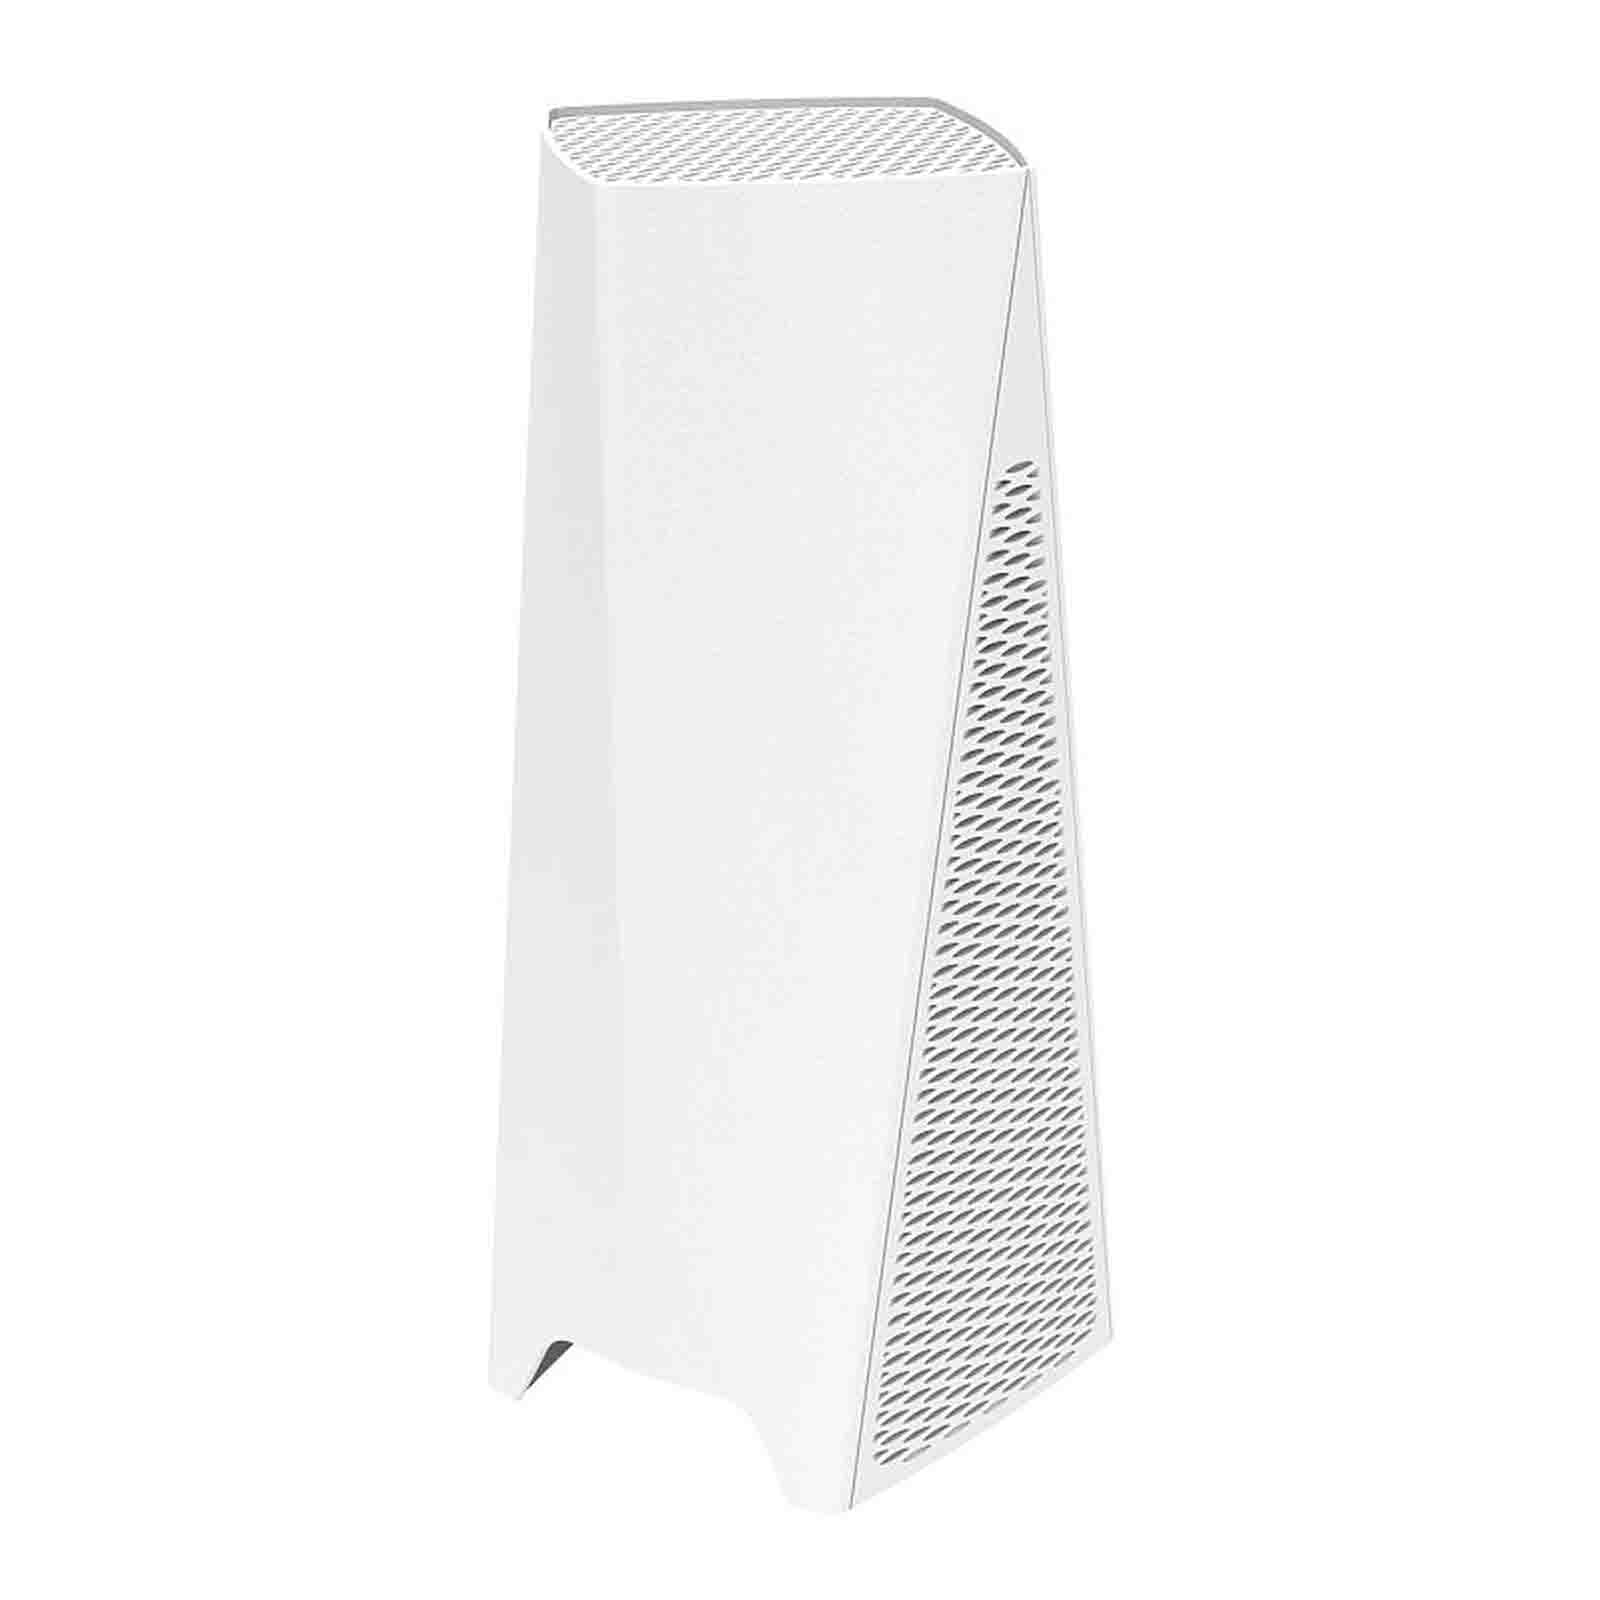 MikroTik Audience WiFi (RBD25G-5HPacQD2HPnD)